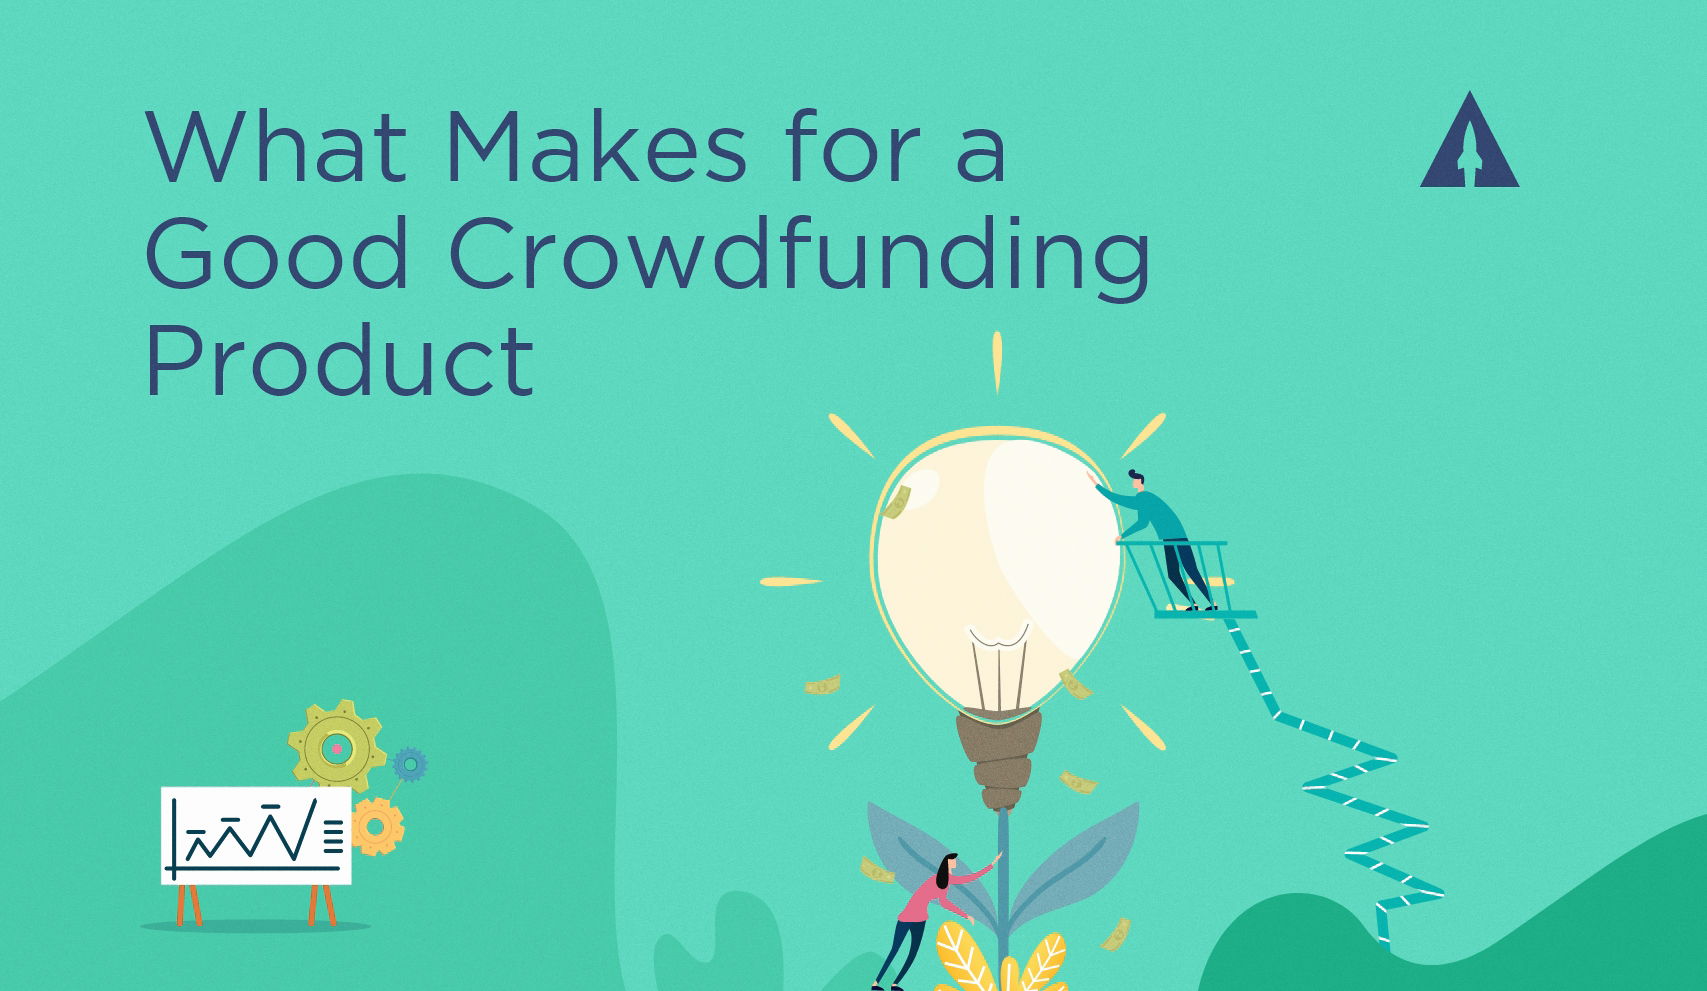 What makes for a good crowdfunding product?